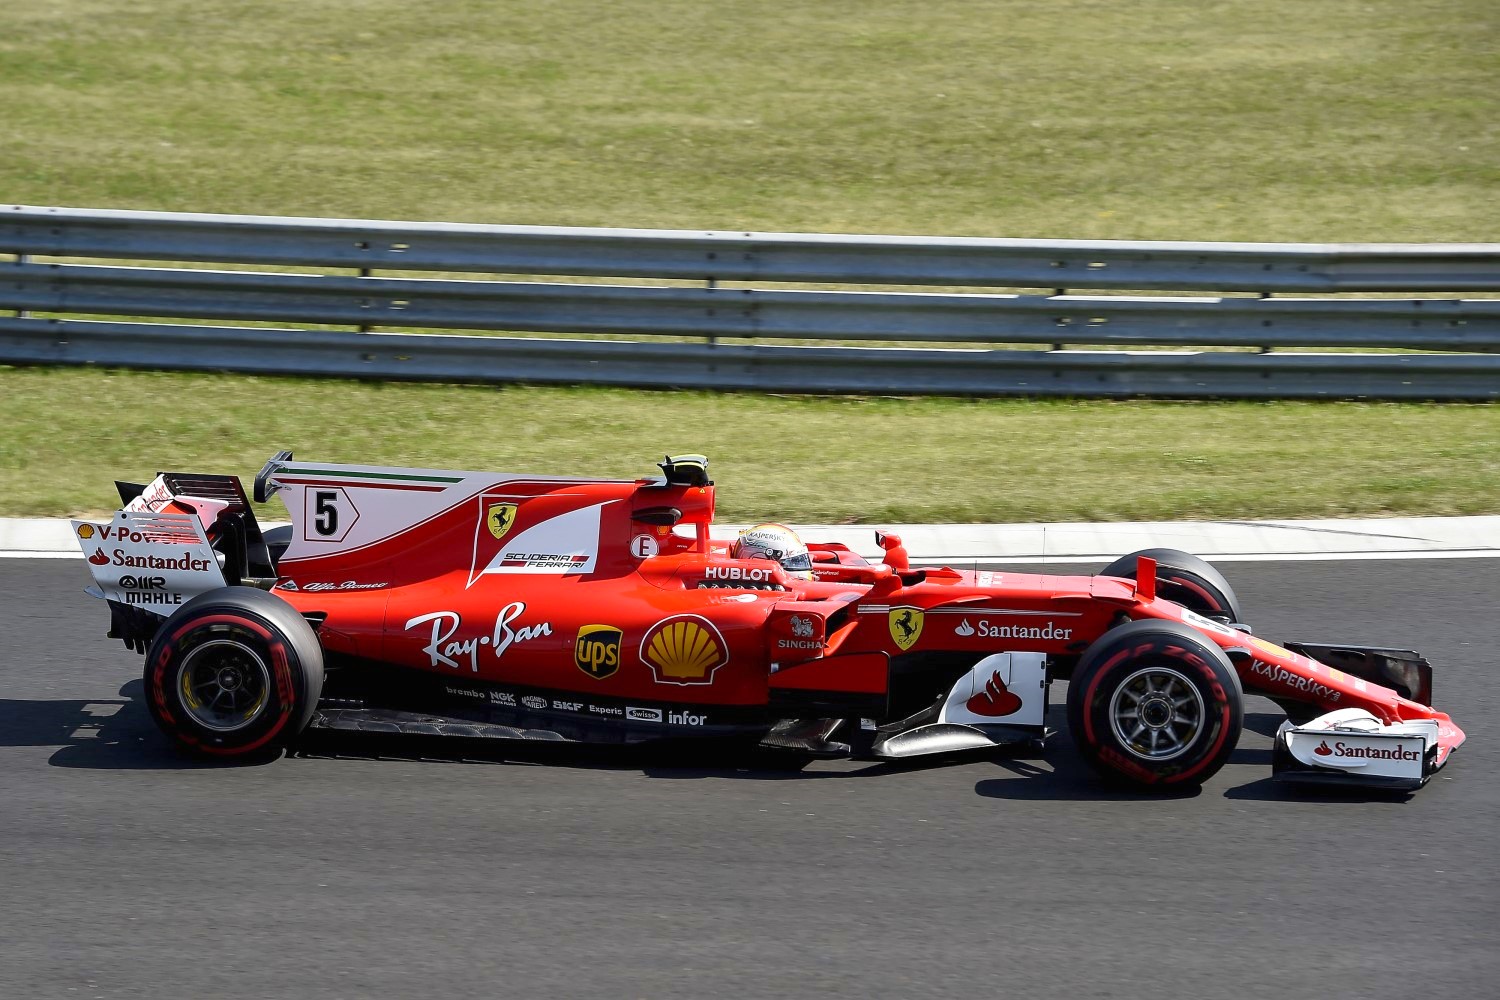 Vettel only ran for a short time in testing Wednesday but was immediately faster than anyone